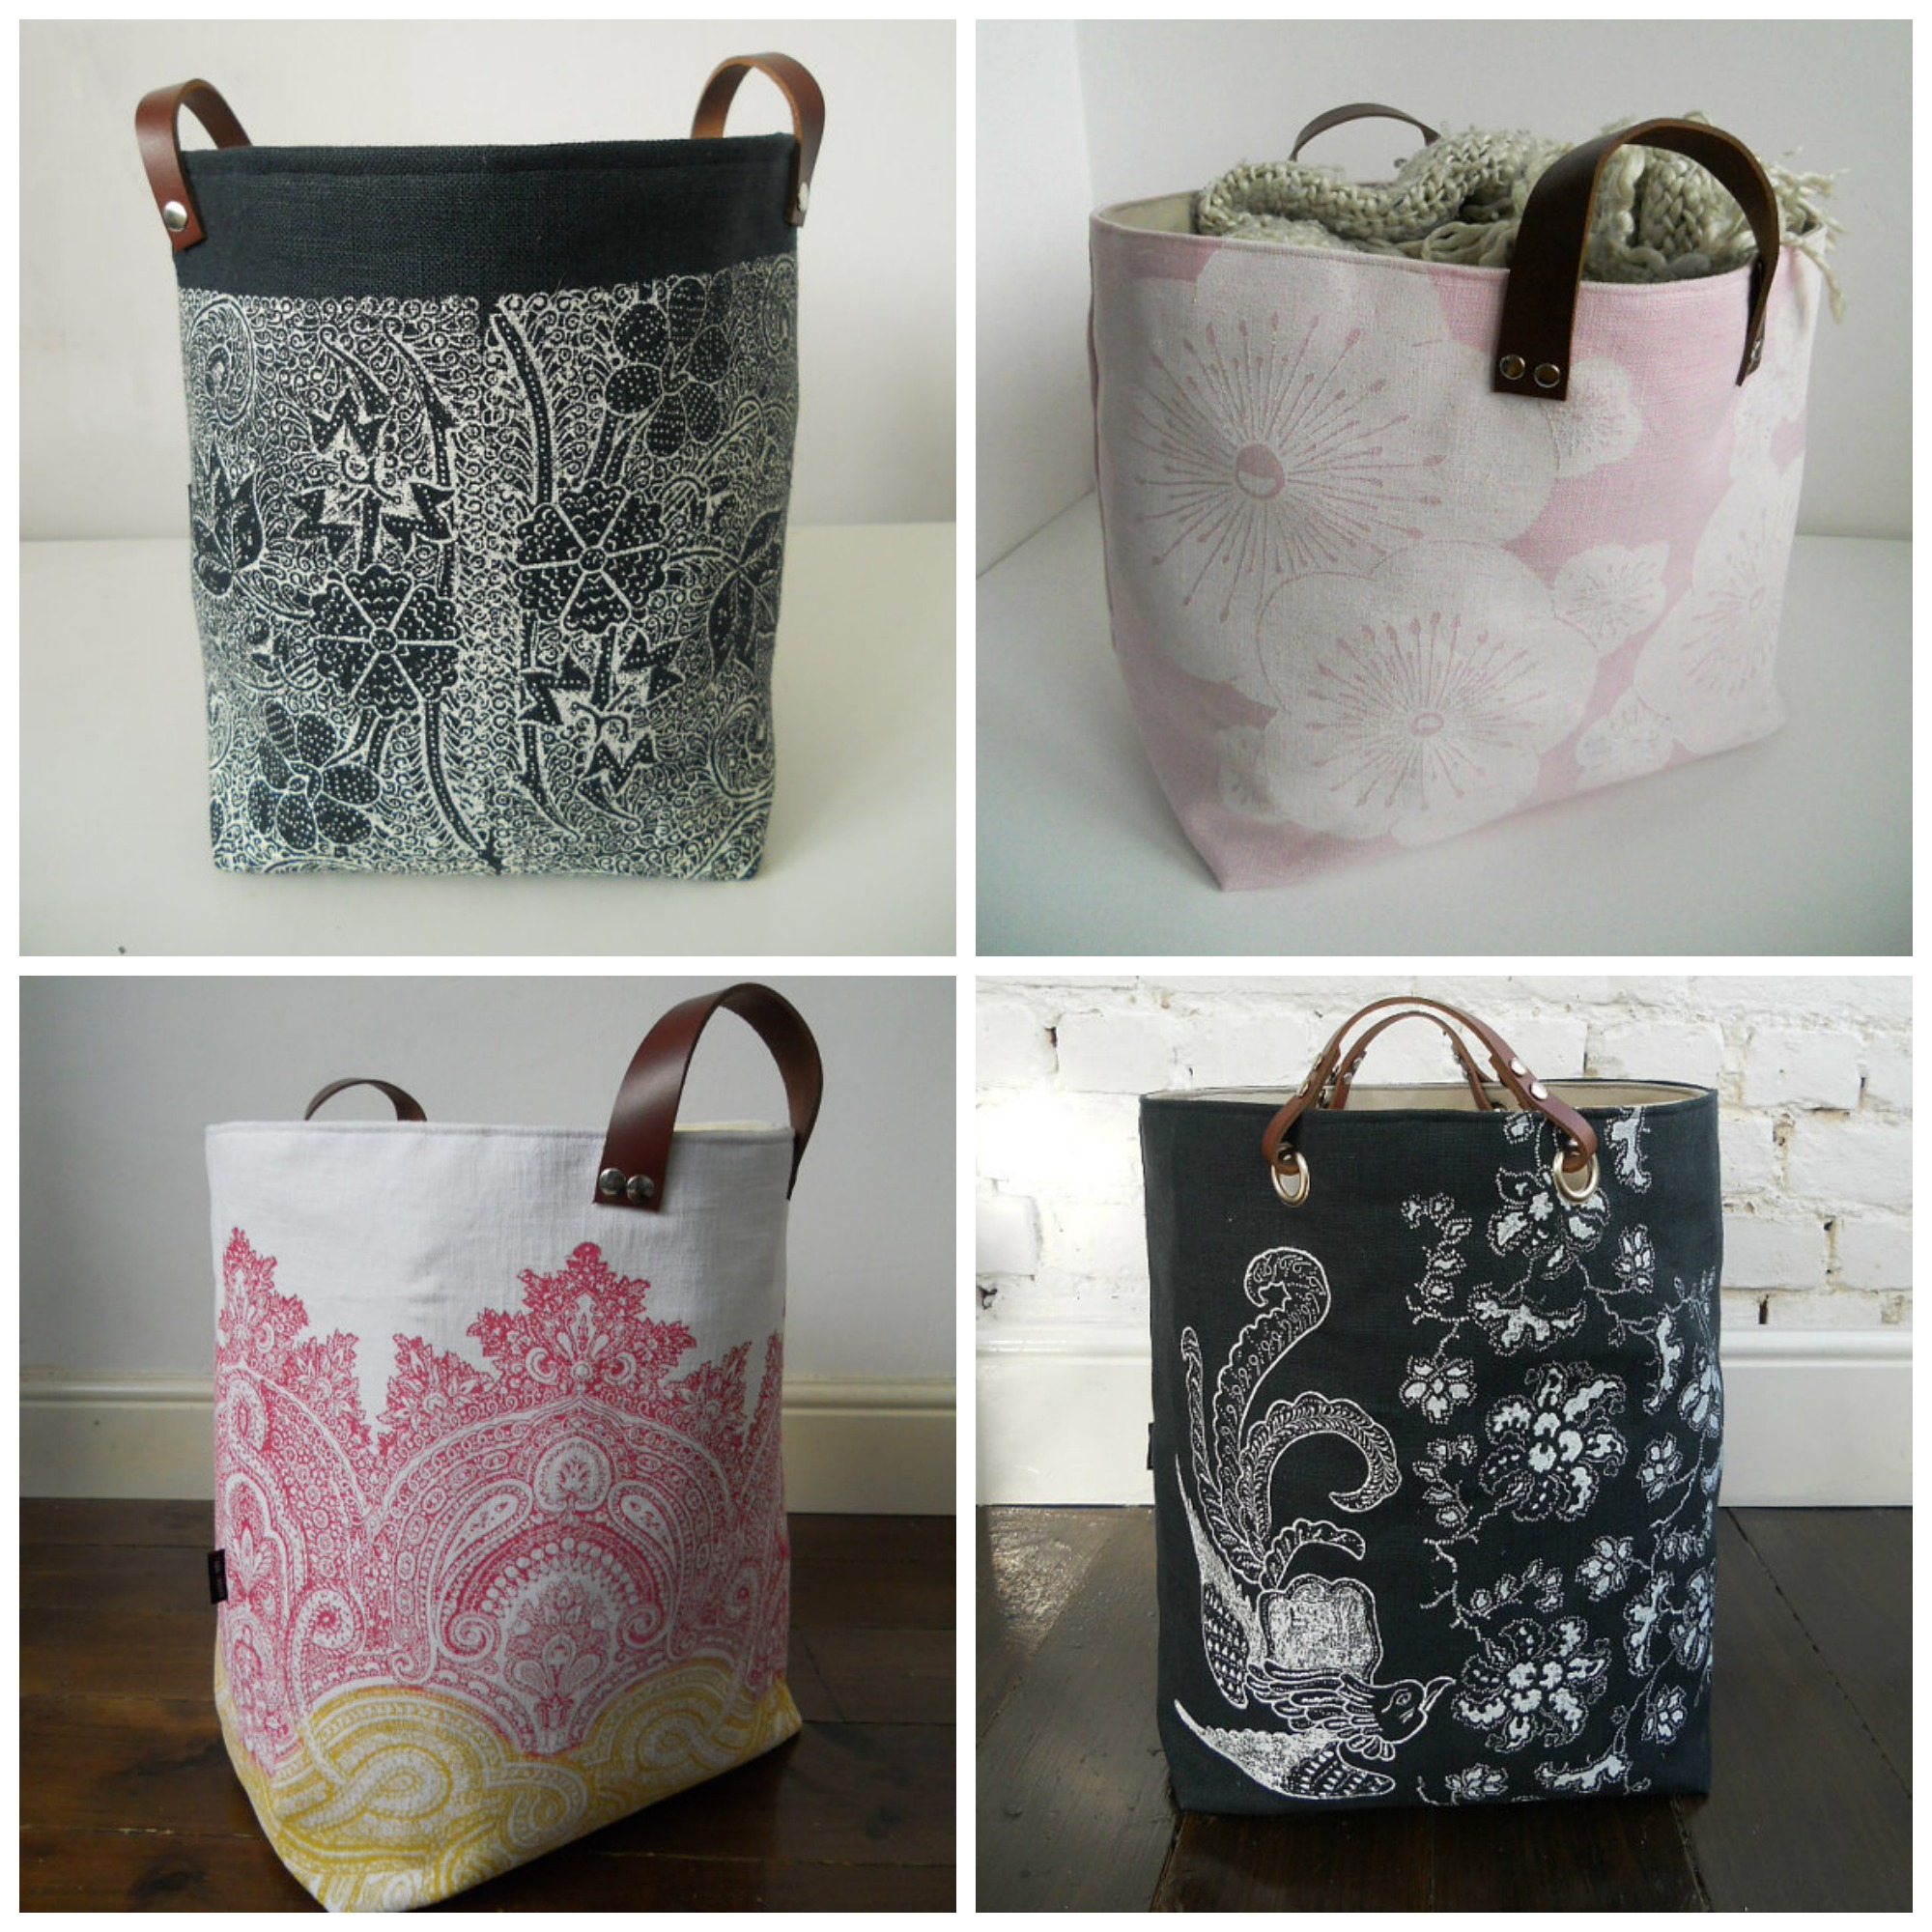 handmade storage bags by papatotoro from etsy